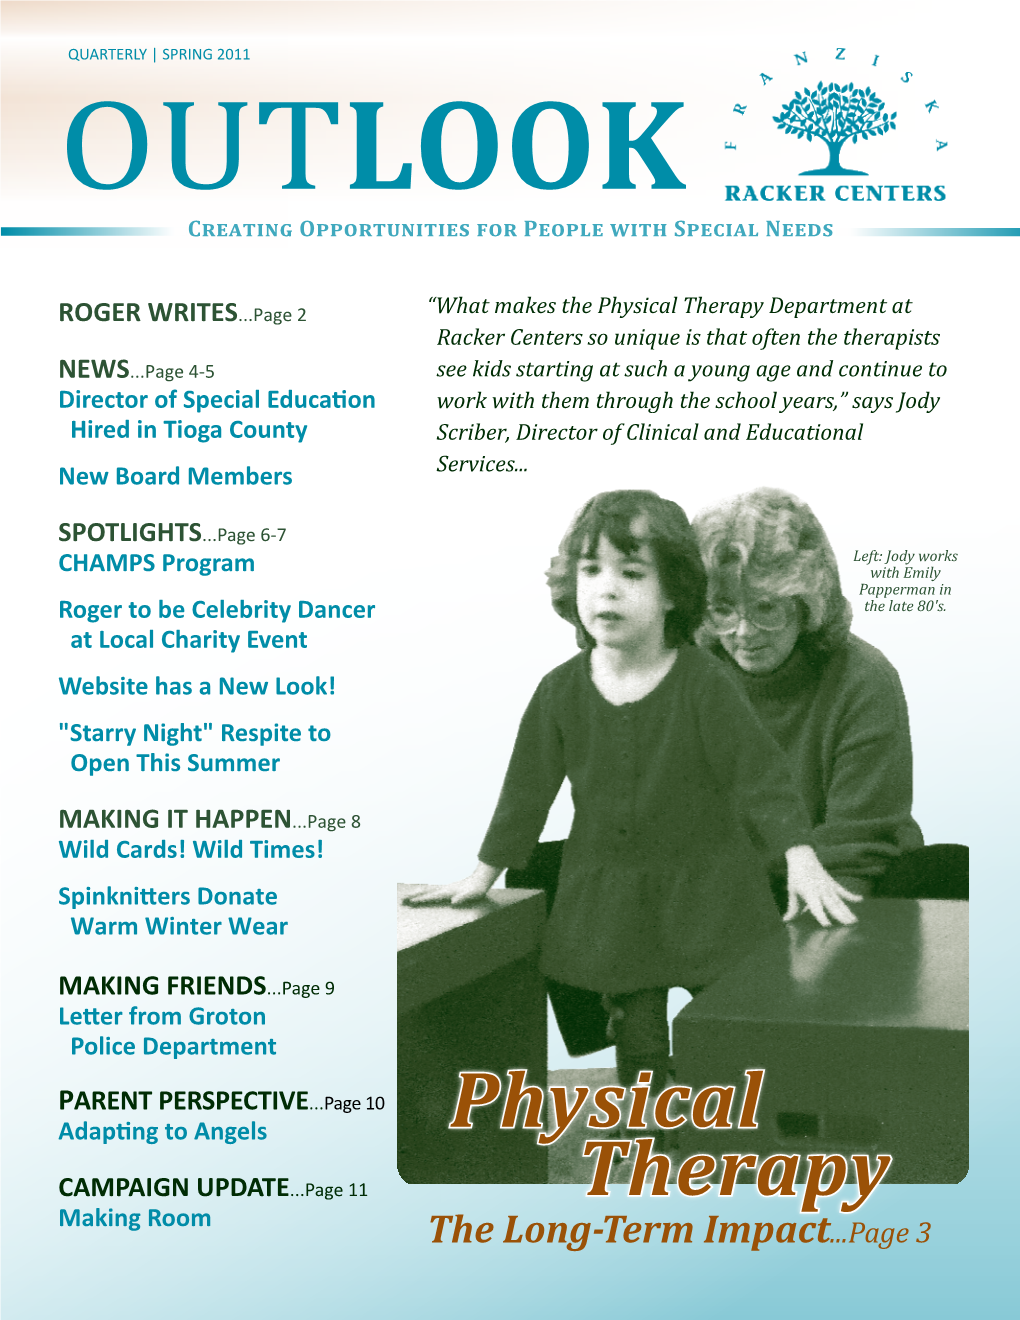 SPRING 2011 Outlook Creating Opportunities for People with Special Needs